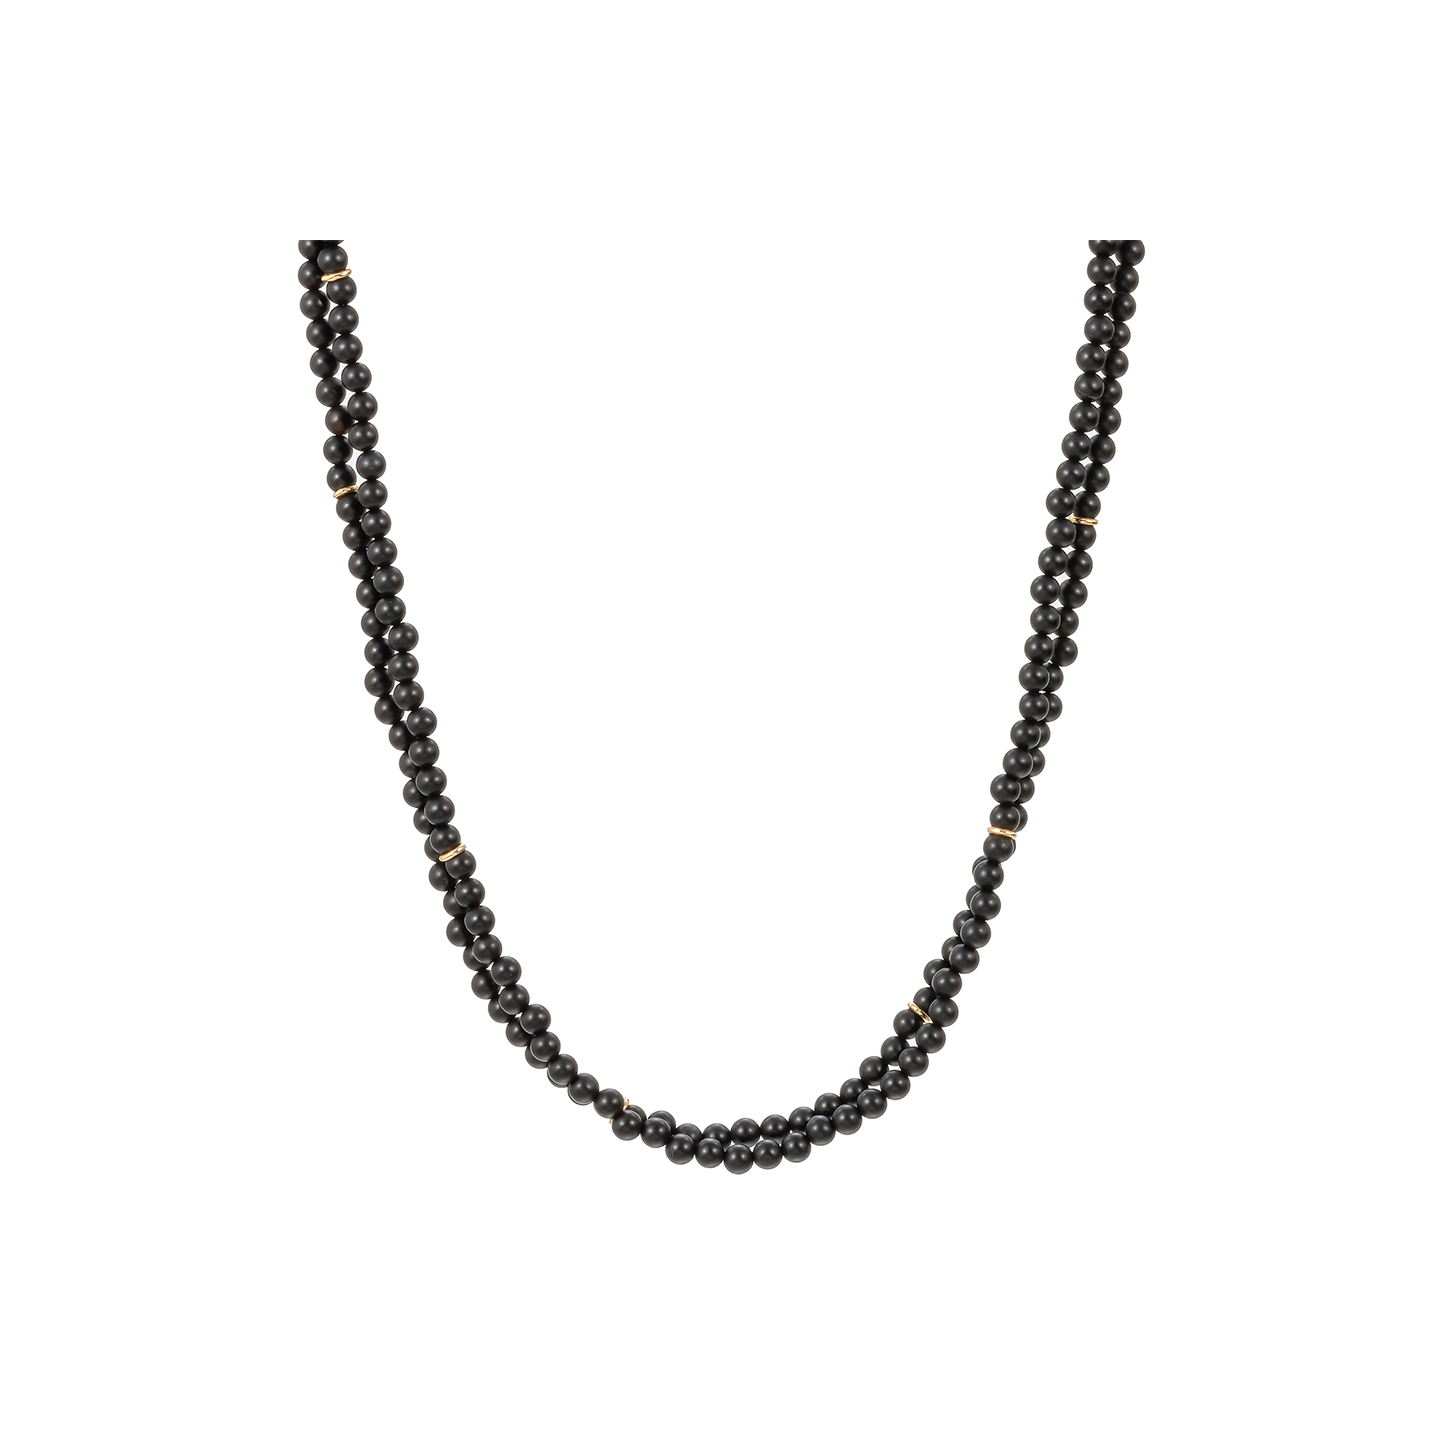 Tina Negri Long Black Matte Onyx and Gold Link Necklace